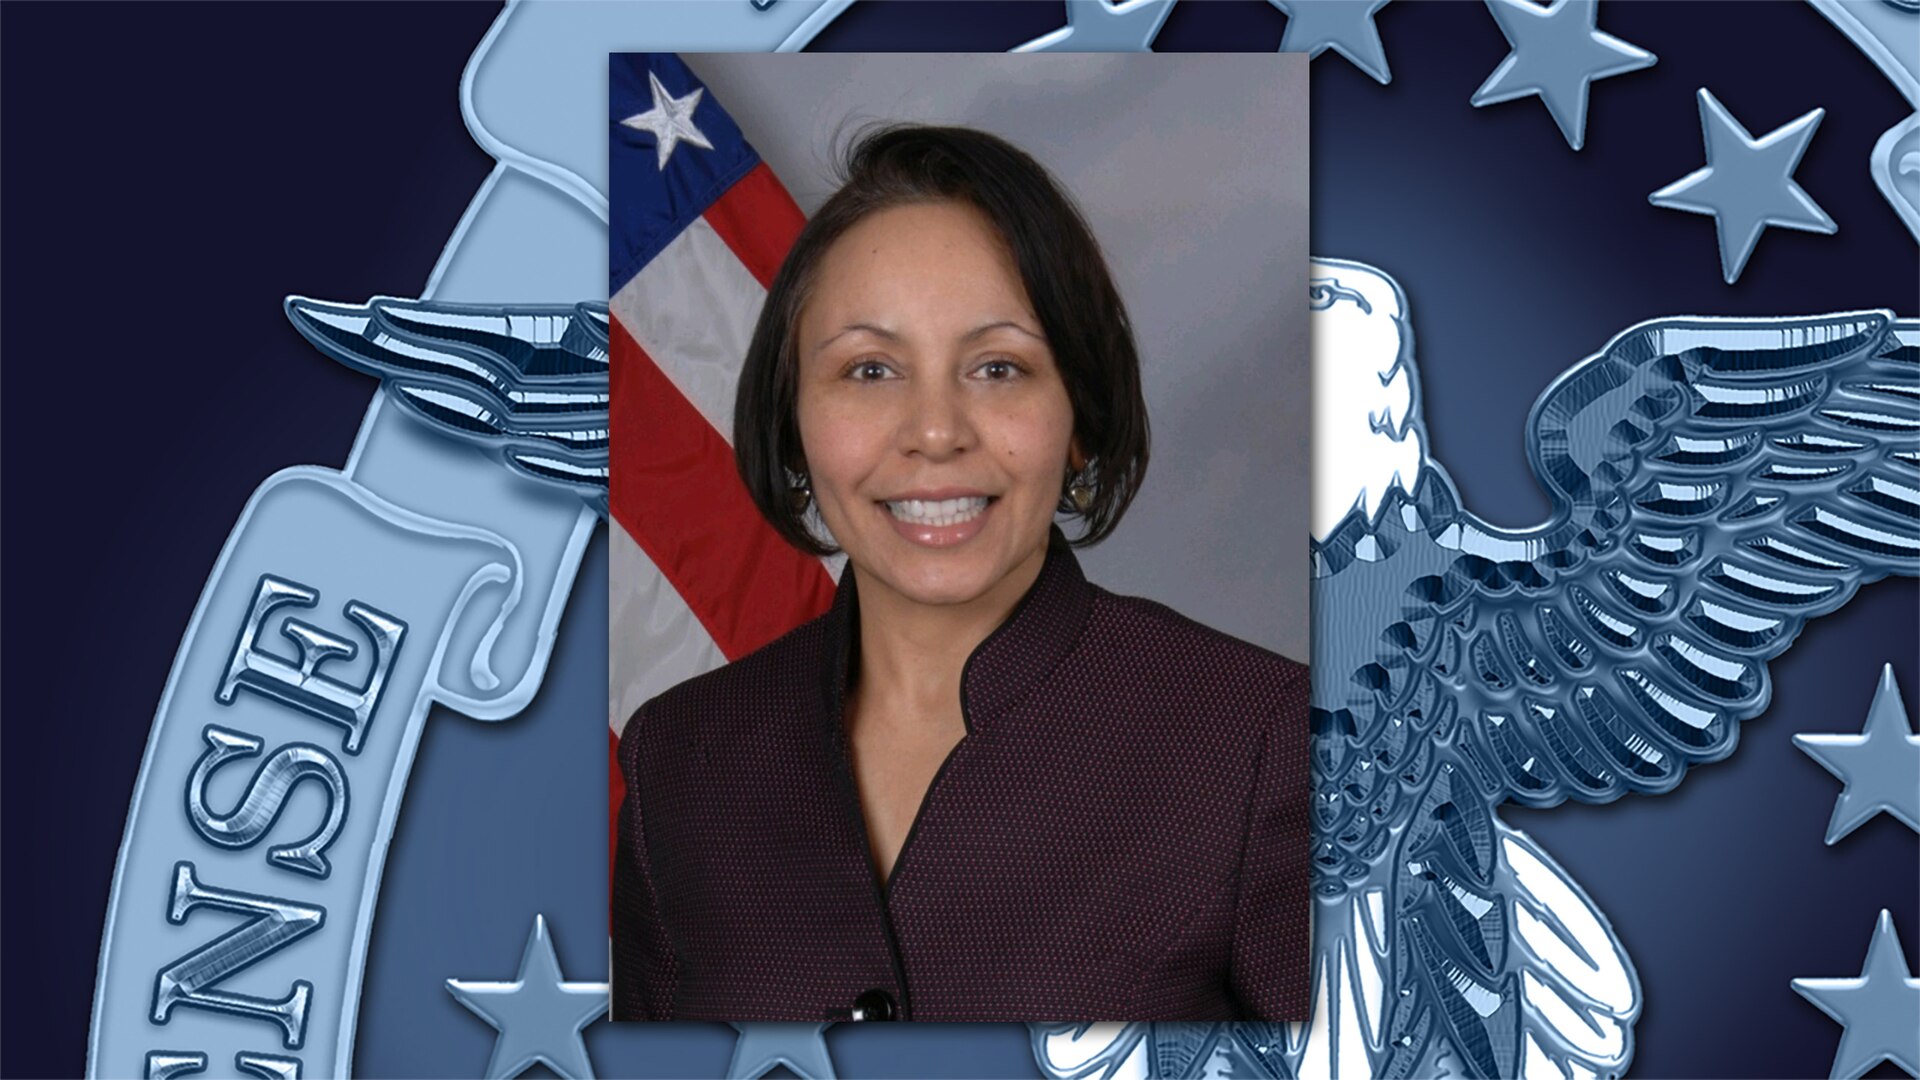 Portrait of Hispanic woman with American flag against DLA background graphic.